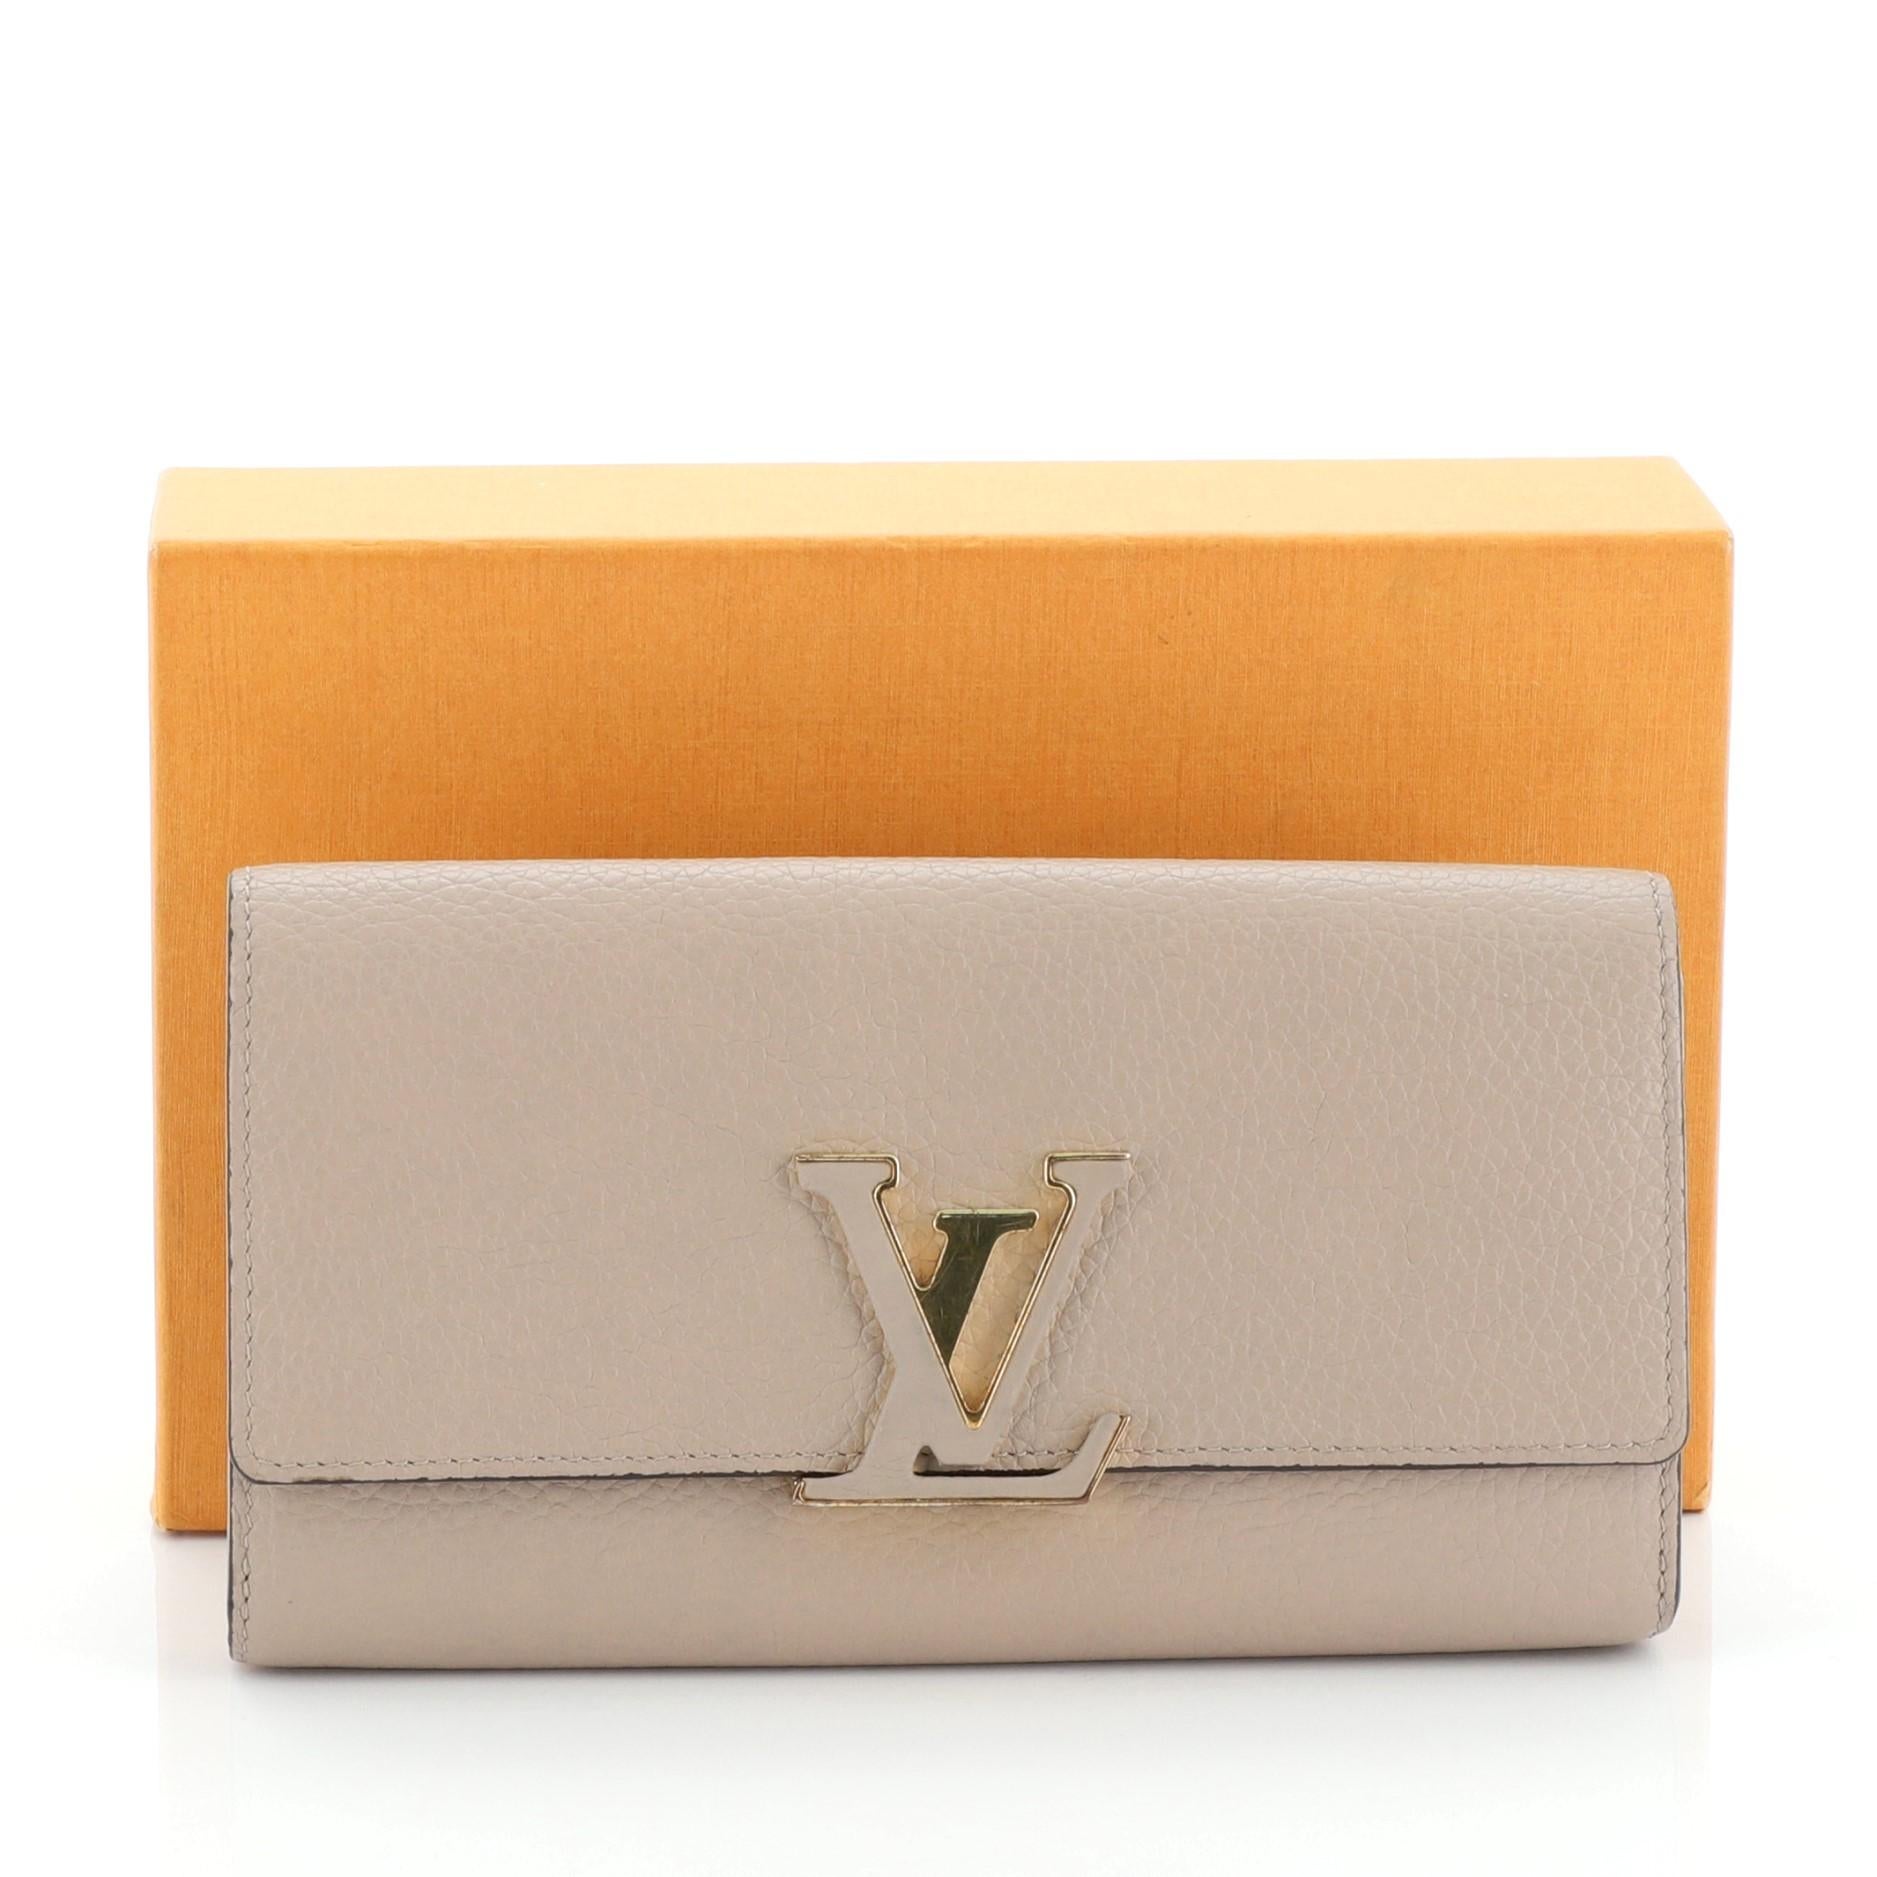 This Louis Vuitton Capucines Wallet Leather, crafted in neutral leather, features a signature LV logo in front and gold-tone hardware. Its snap closure opens to a brown leather interior with multiple card slots and middle zip compartment.